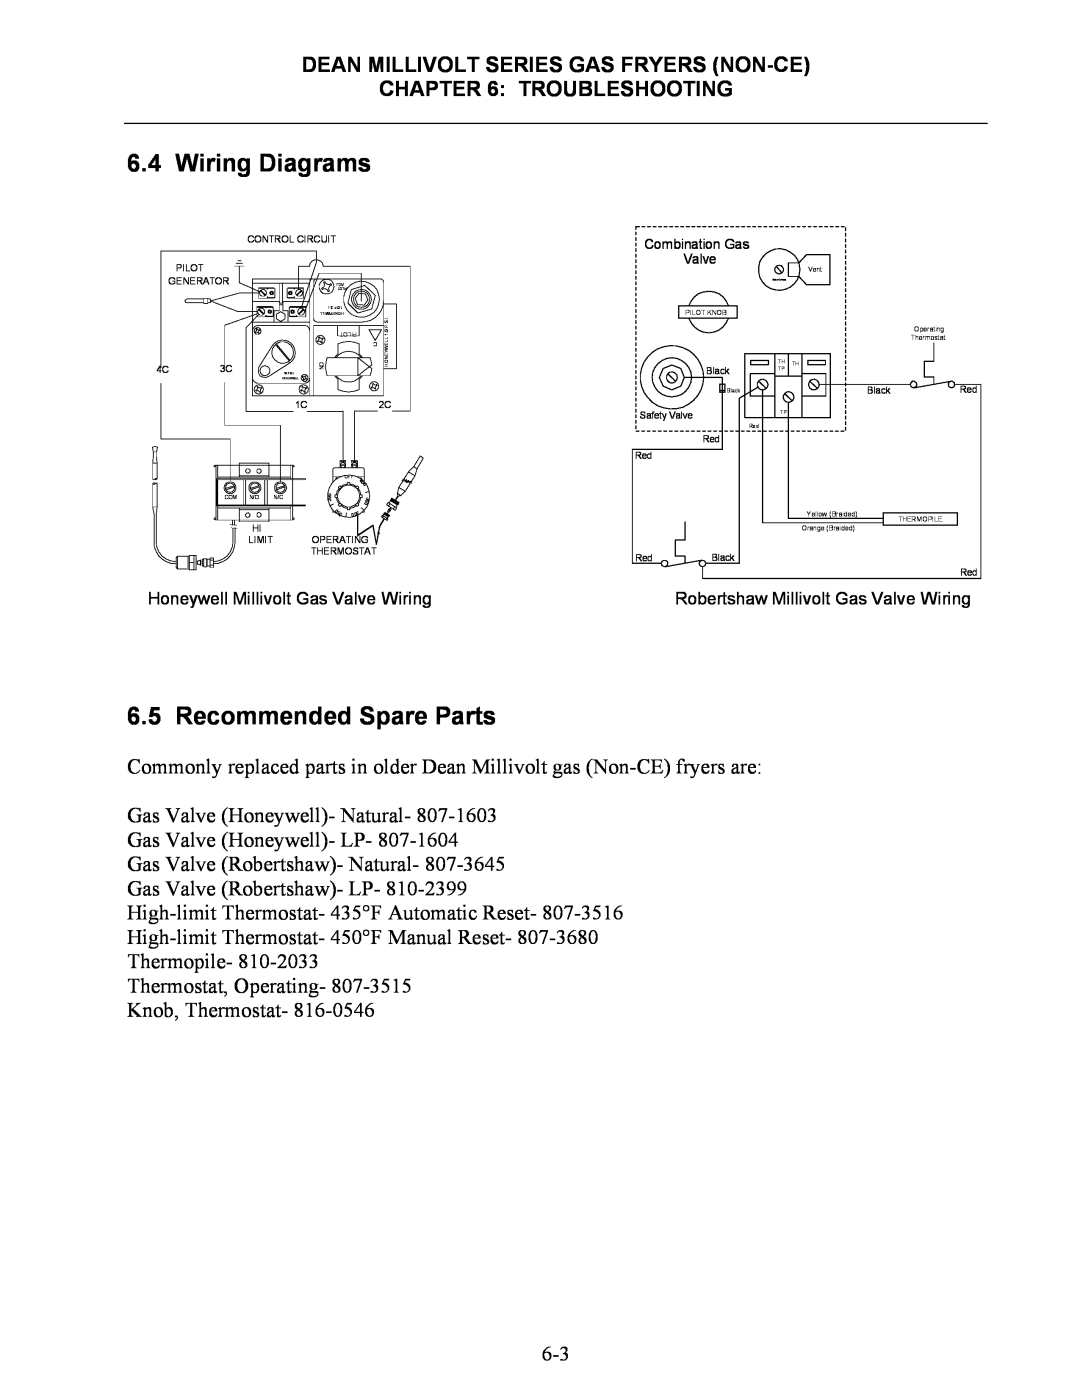 Frymaster SM35 Wiring Diagrams, Recommended Spare Parts, Dean Millivolt Series Gas Fryers Non-Ce Troubleshooting 